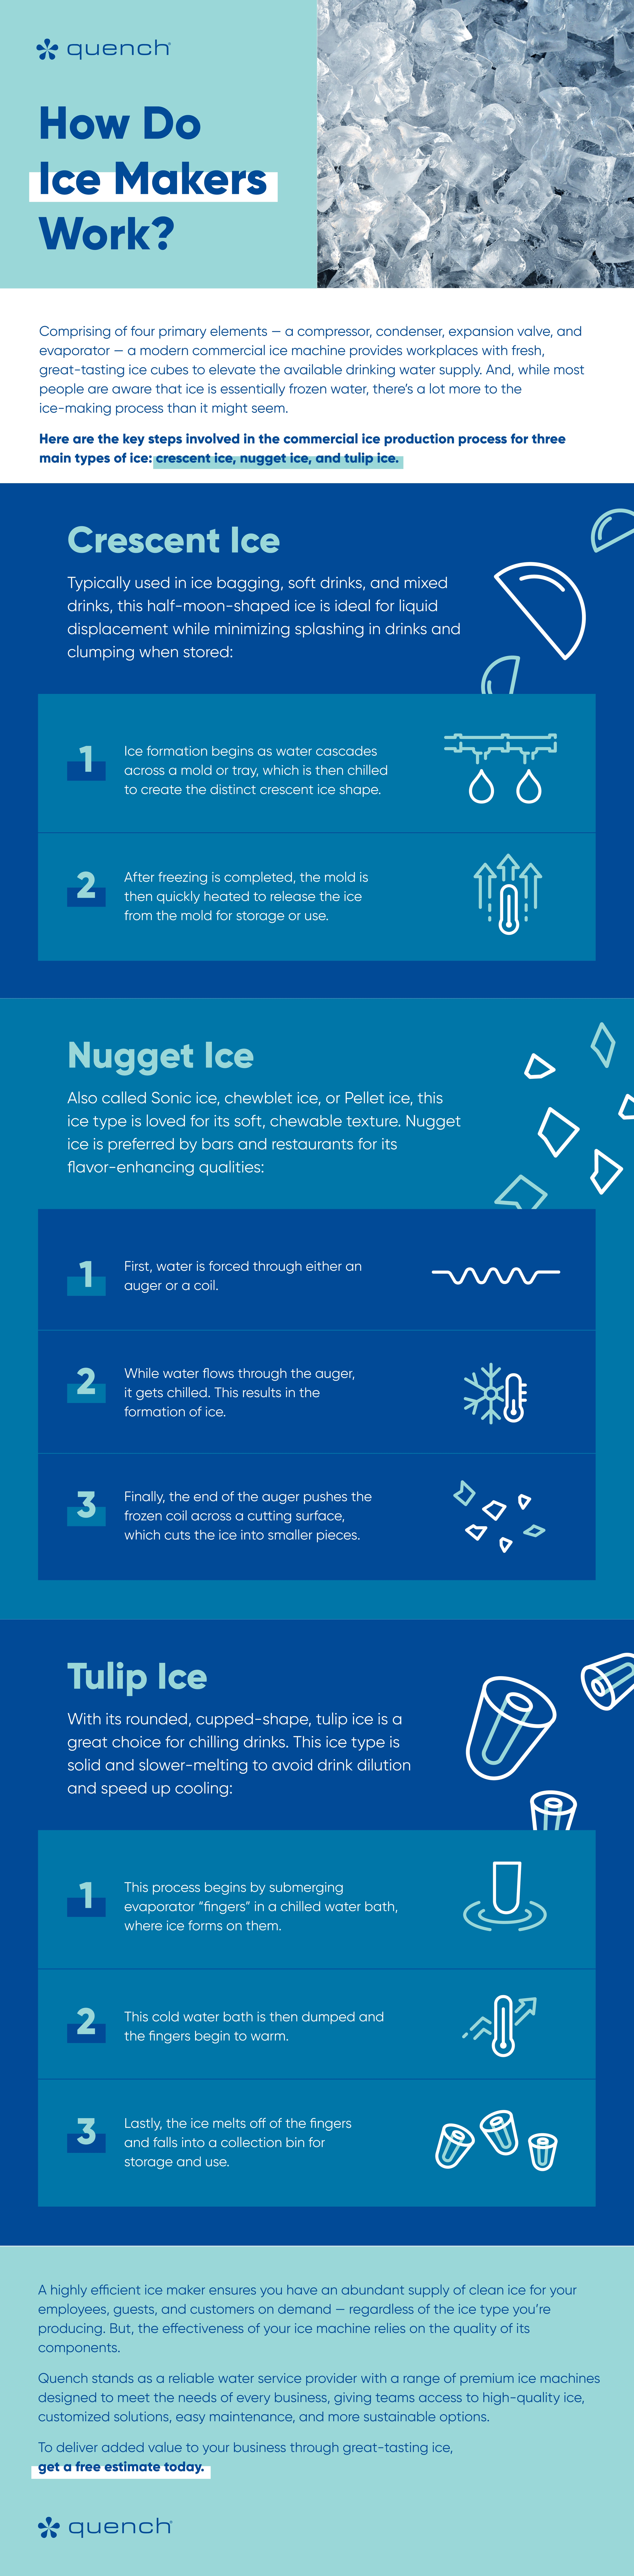 how does an ice maker work infographic